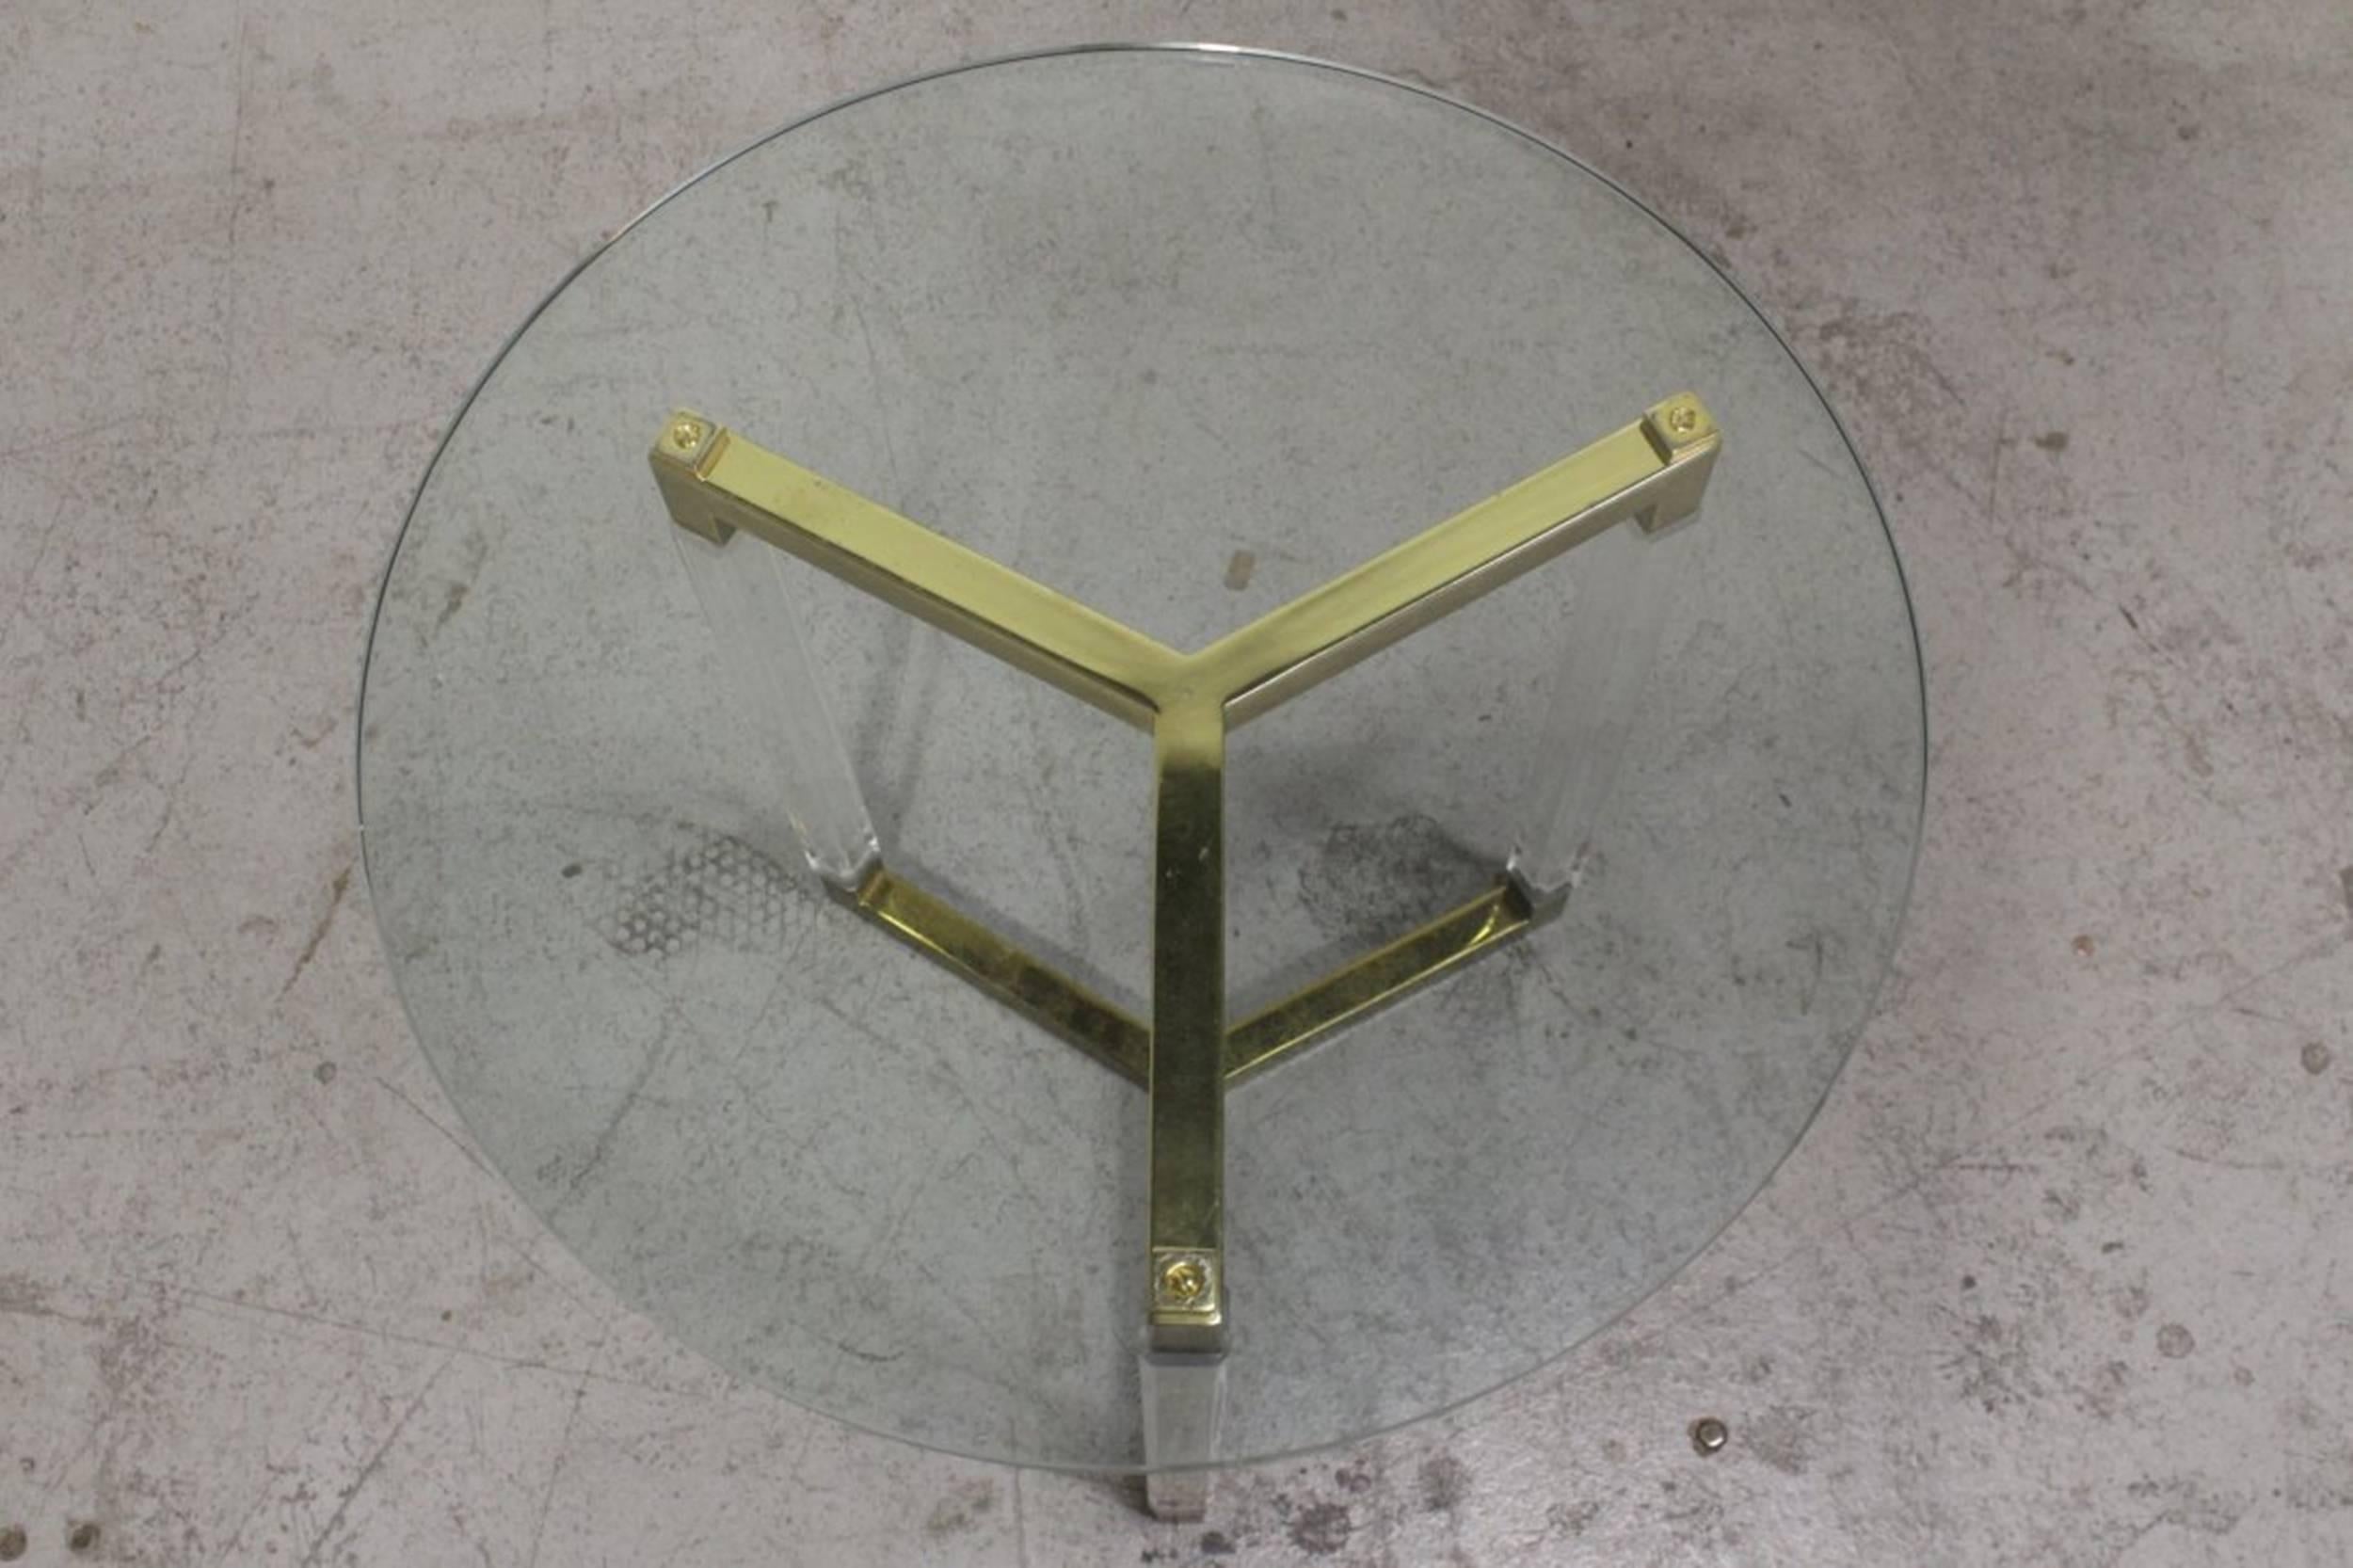 Beautiful set of side tables in brass, glass and Lucite designed and manufactured in the 1960s by the father of Lucite, Charles Hollis Jones as part of his metric collection.

The tables are in very good condition, the Lucite is free of chips,